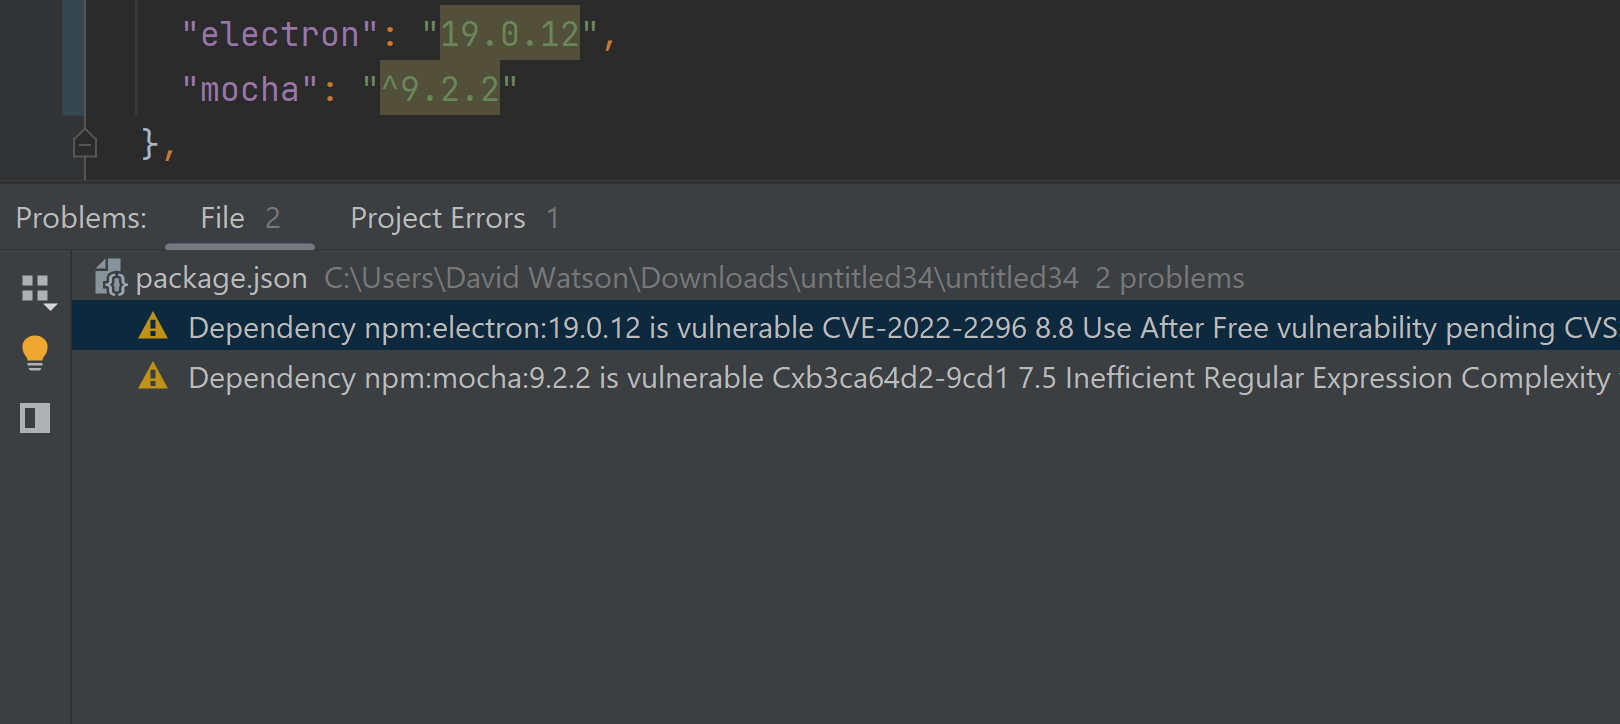 https://www.jetbrains.com/webstorm/whatsnew/img/2022.3/Vulnerabity-checker-for-packages-810@2x.png